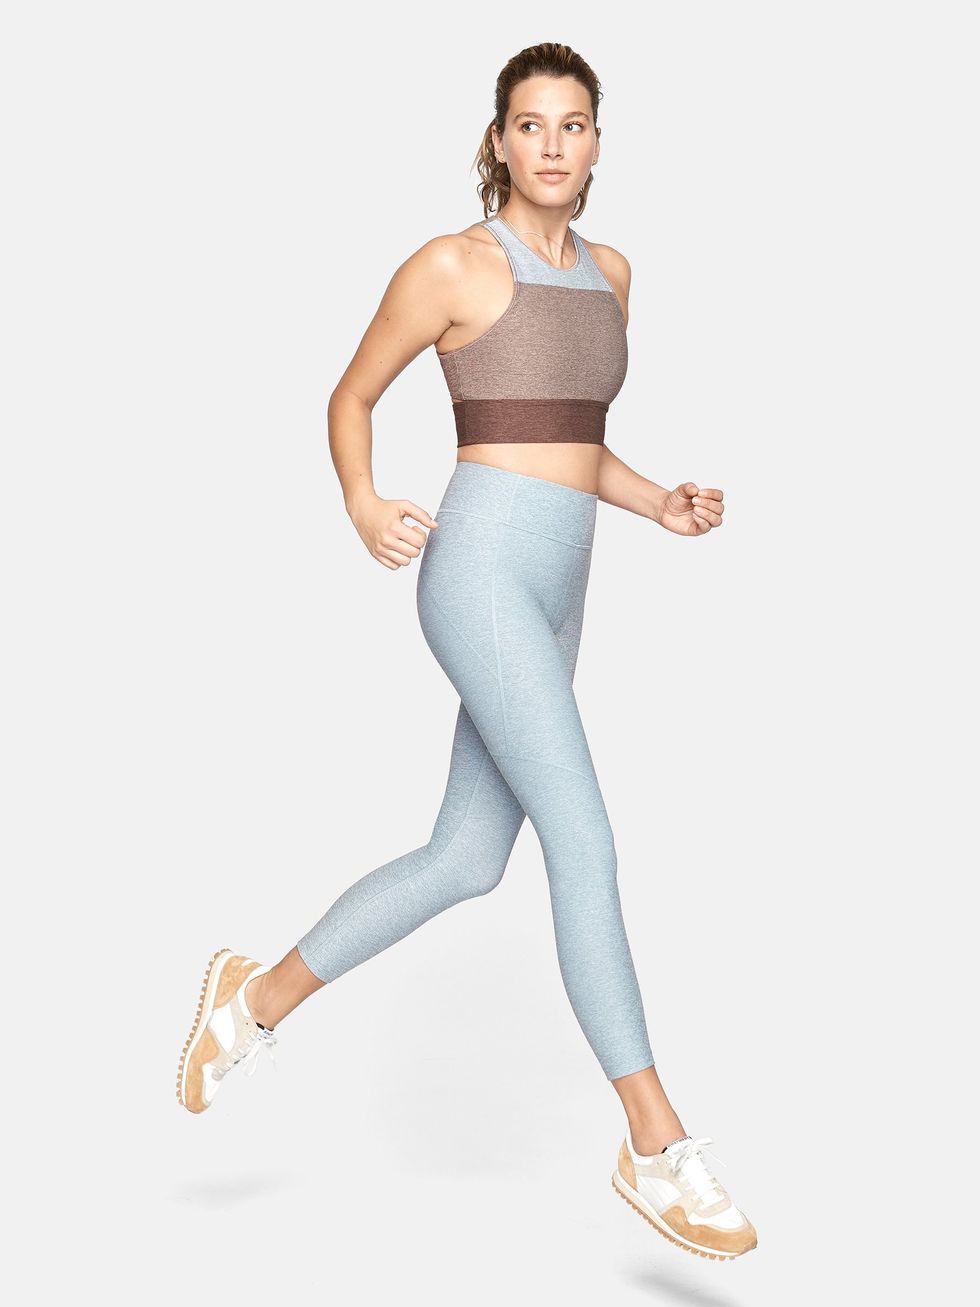 Outdoor Voices The Warmup Light Grey Free Form Leggings Graphite